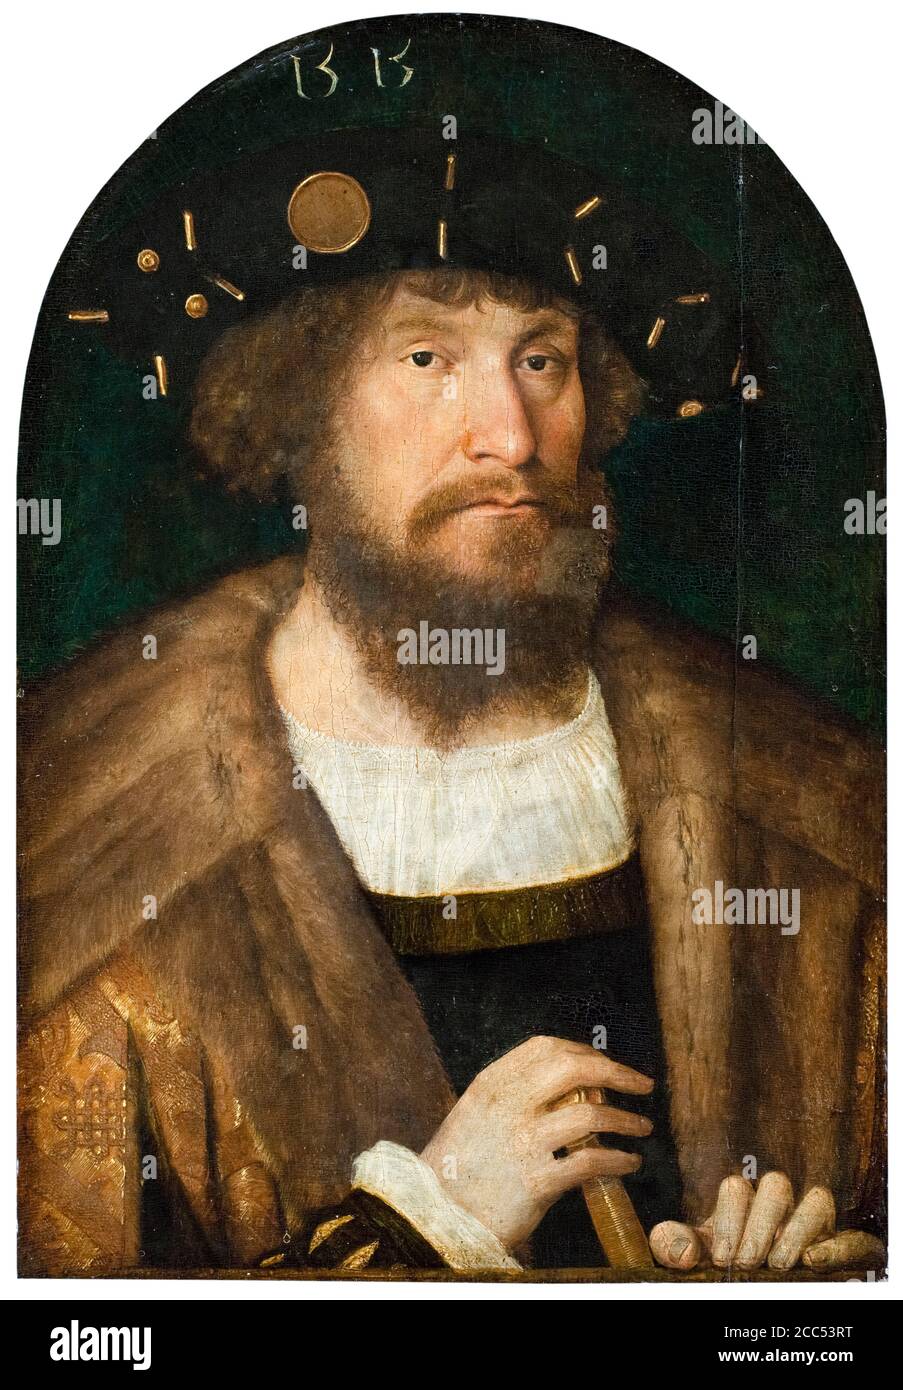 Christian II (1481-1559), King of Denmark, portrait painting by Michiel Sittow, 1514-1515 Stock Photo